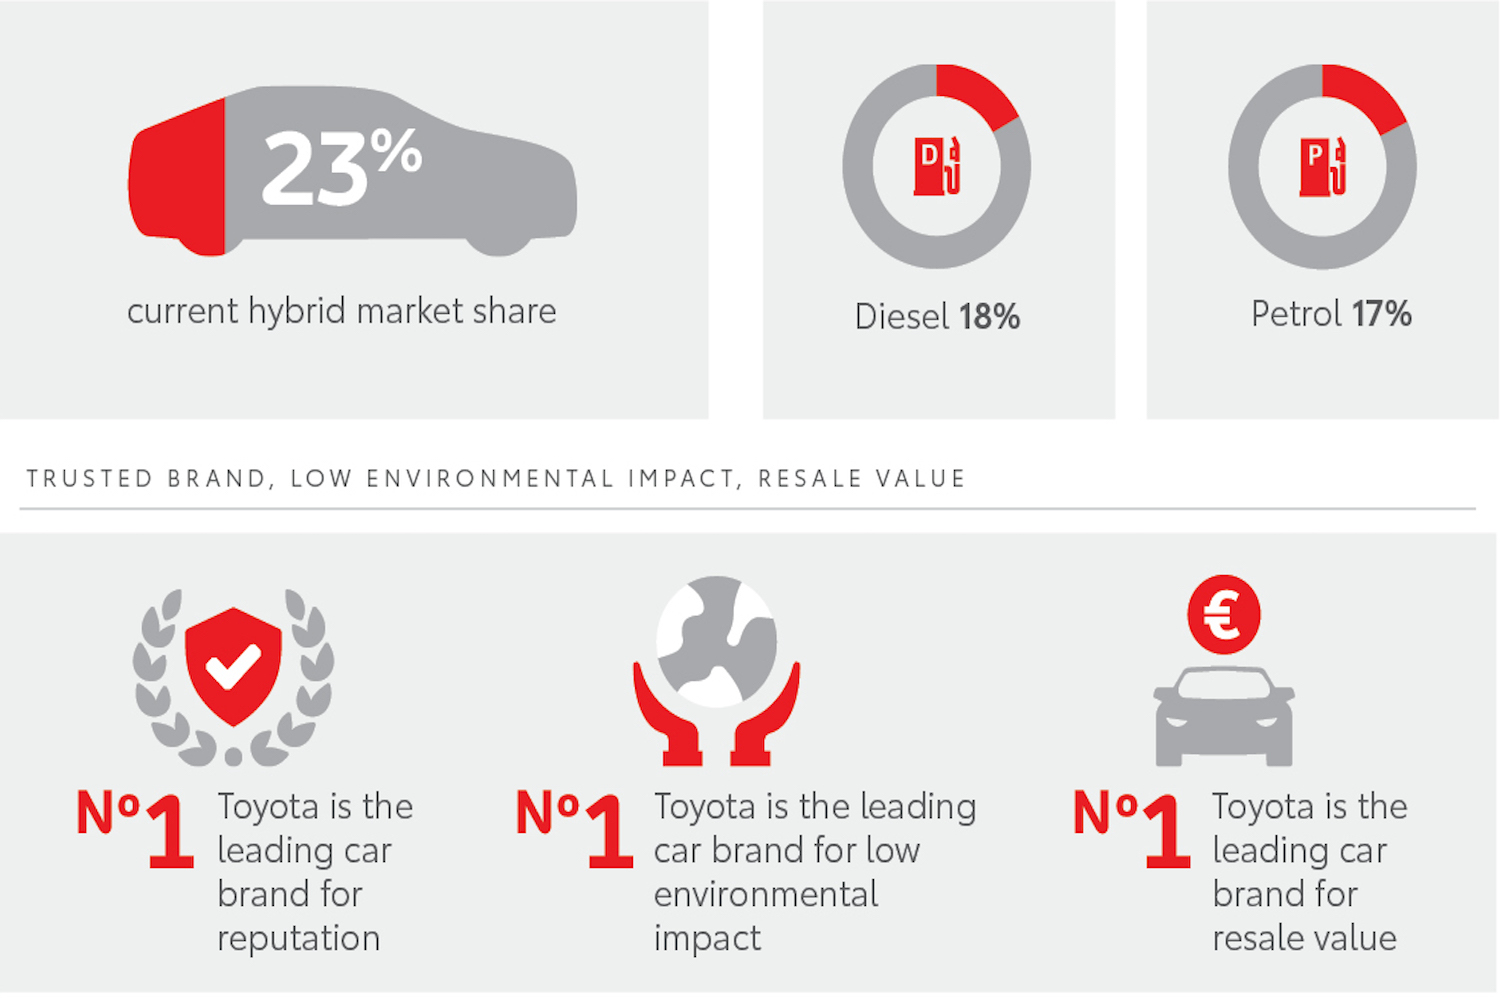 Toyota research points to an increase in interest in hybrids